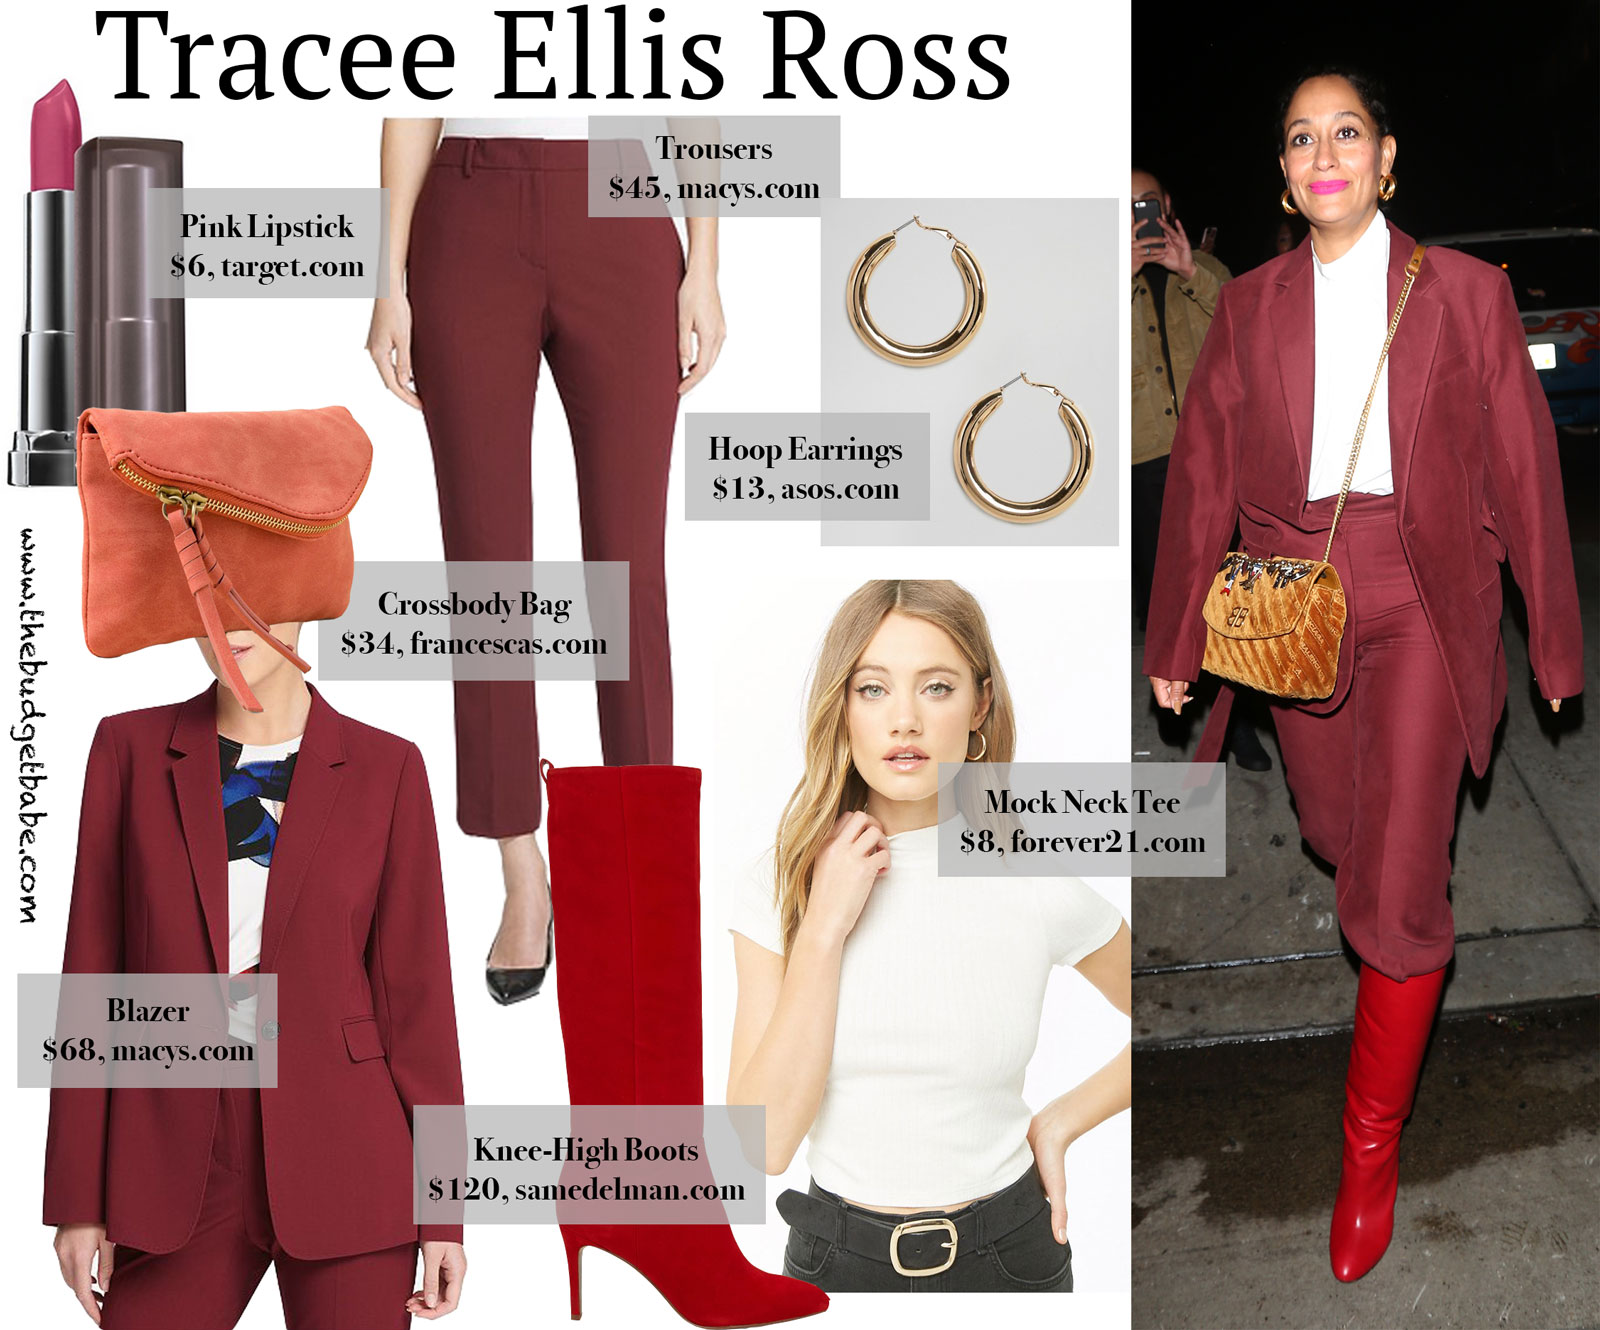 Tracee Ellis Ross Red Pant Suit Look for Less